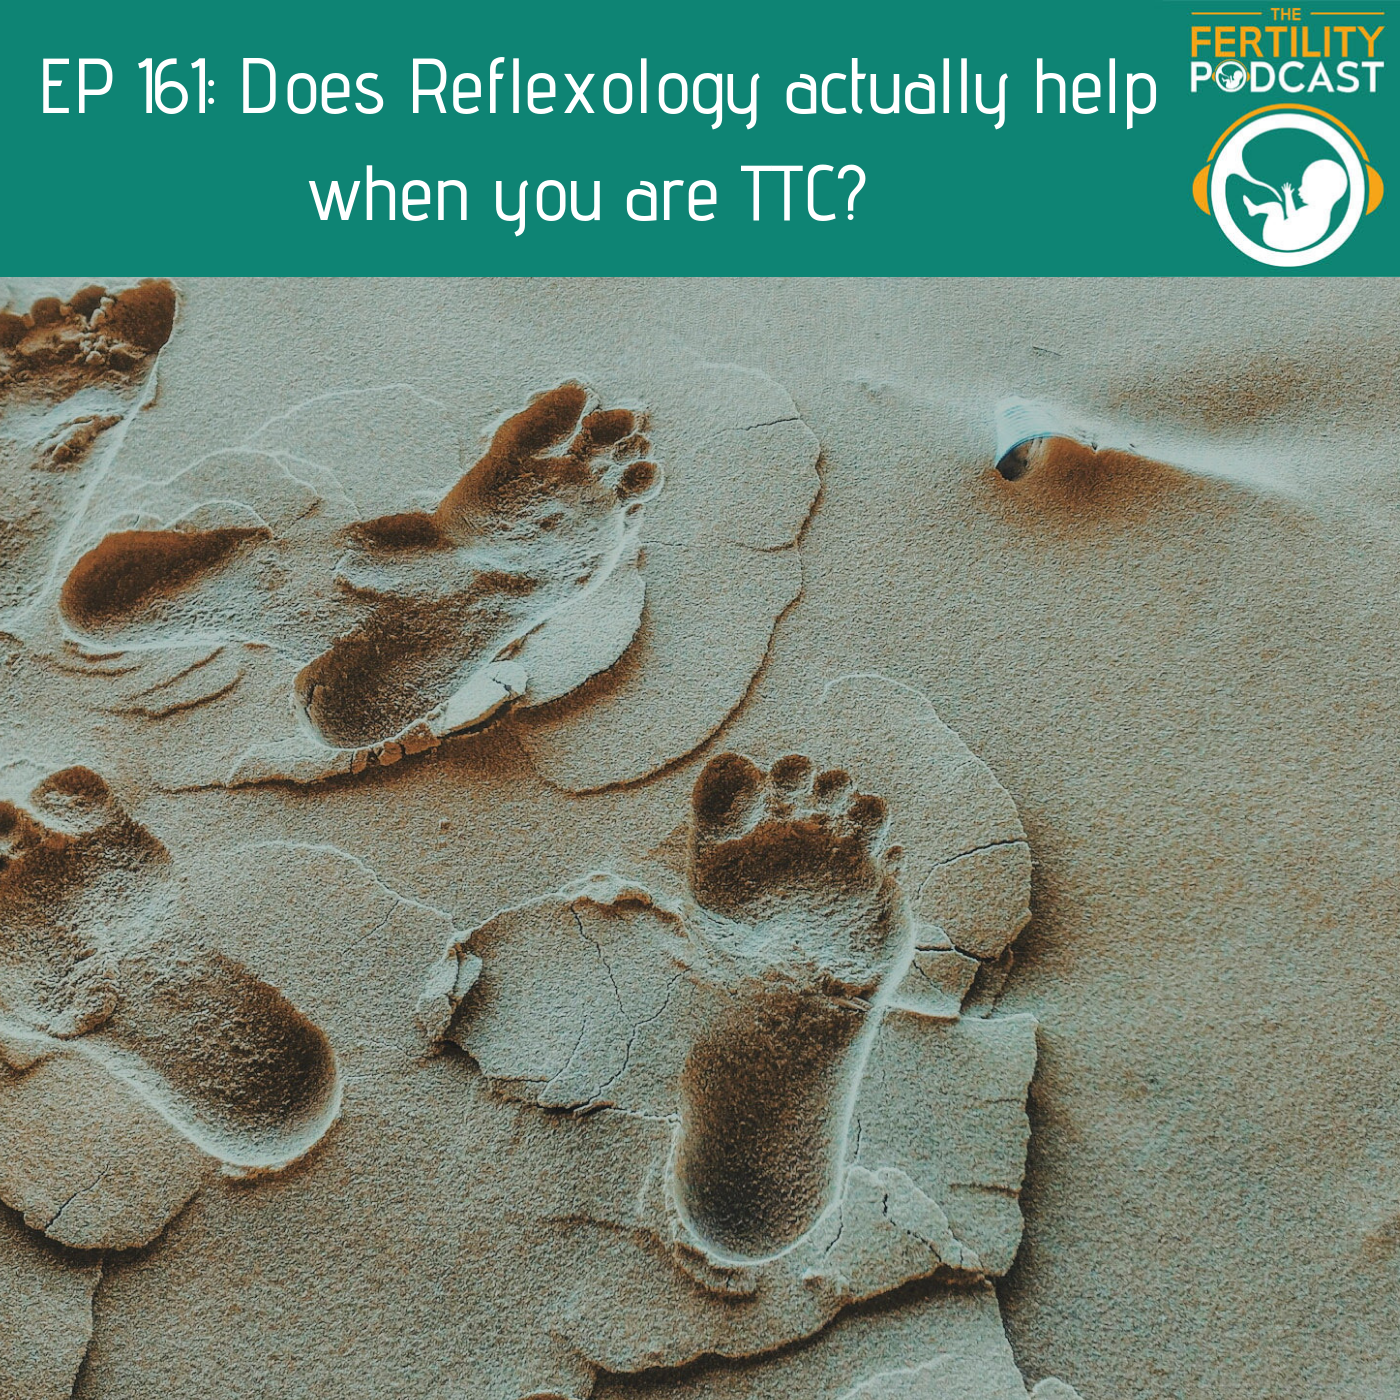 Does Reflexology actually help when you are TTC?